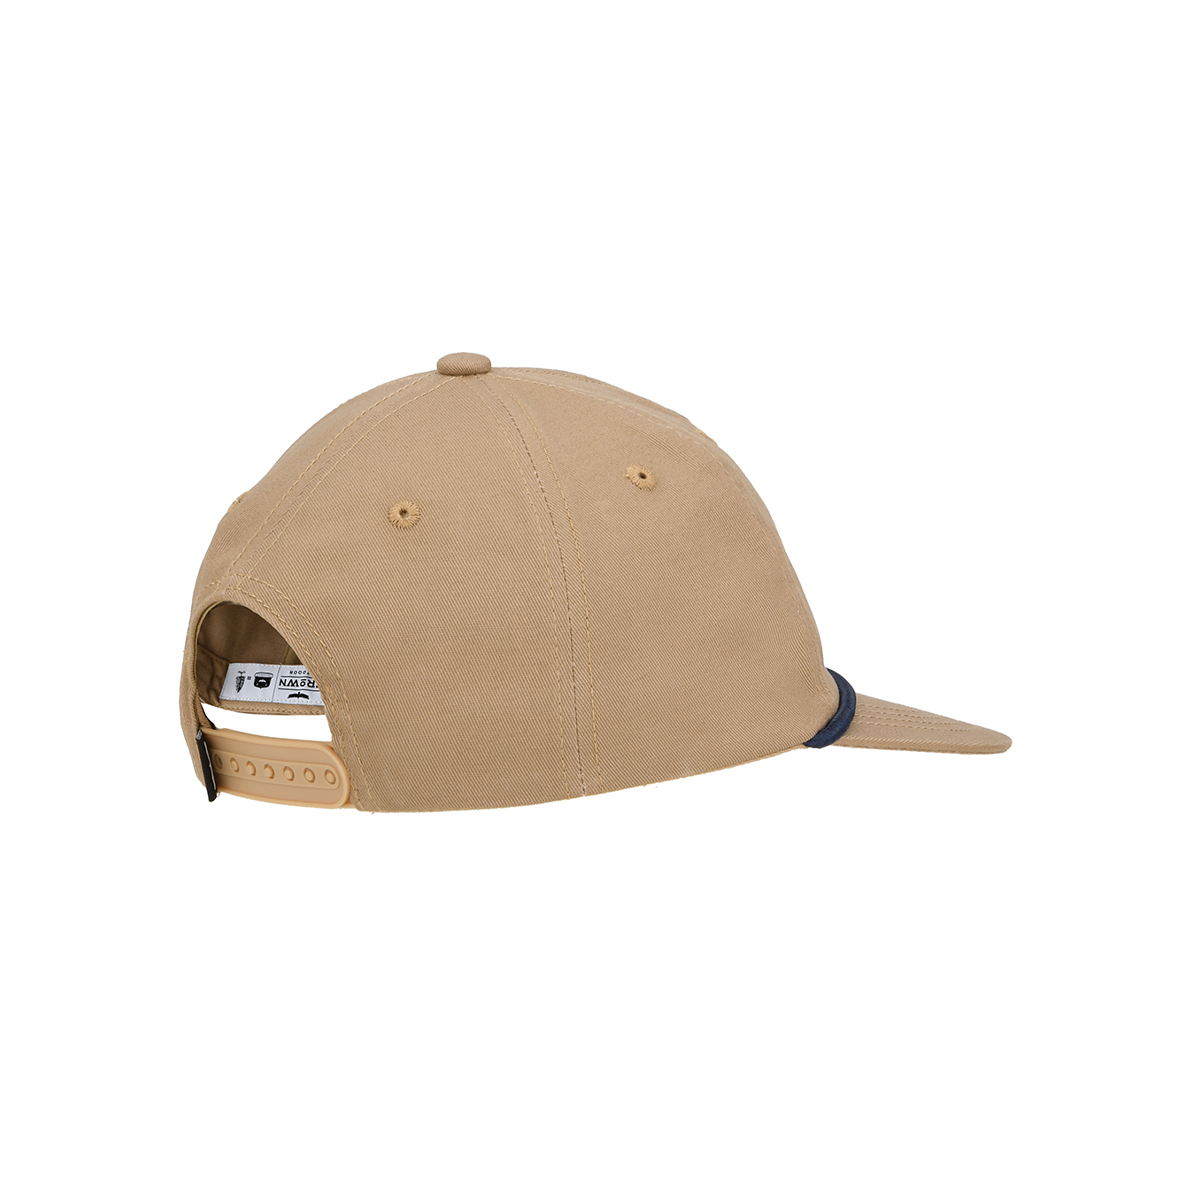 Gorra Trown Triangulo,  image number null